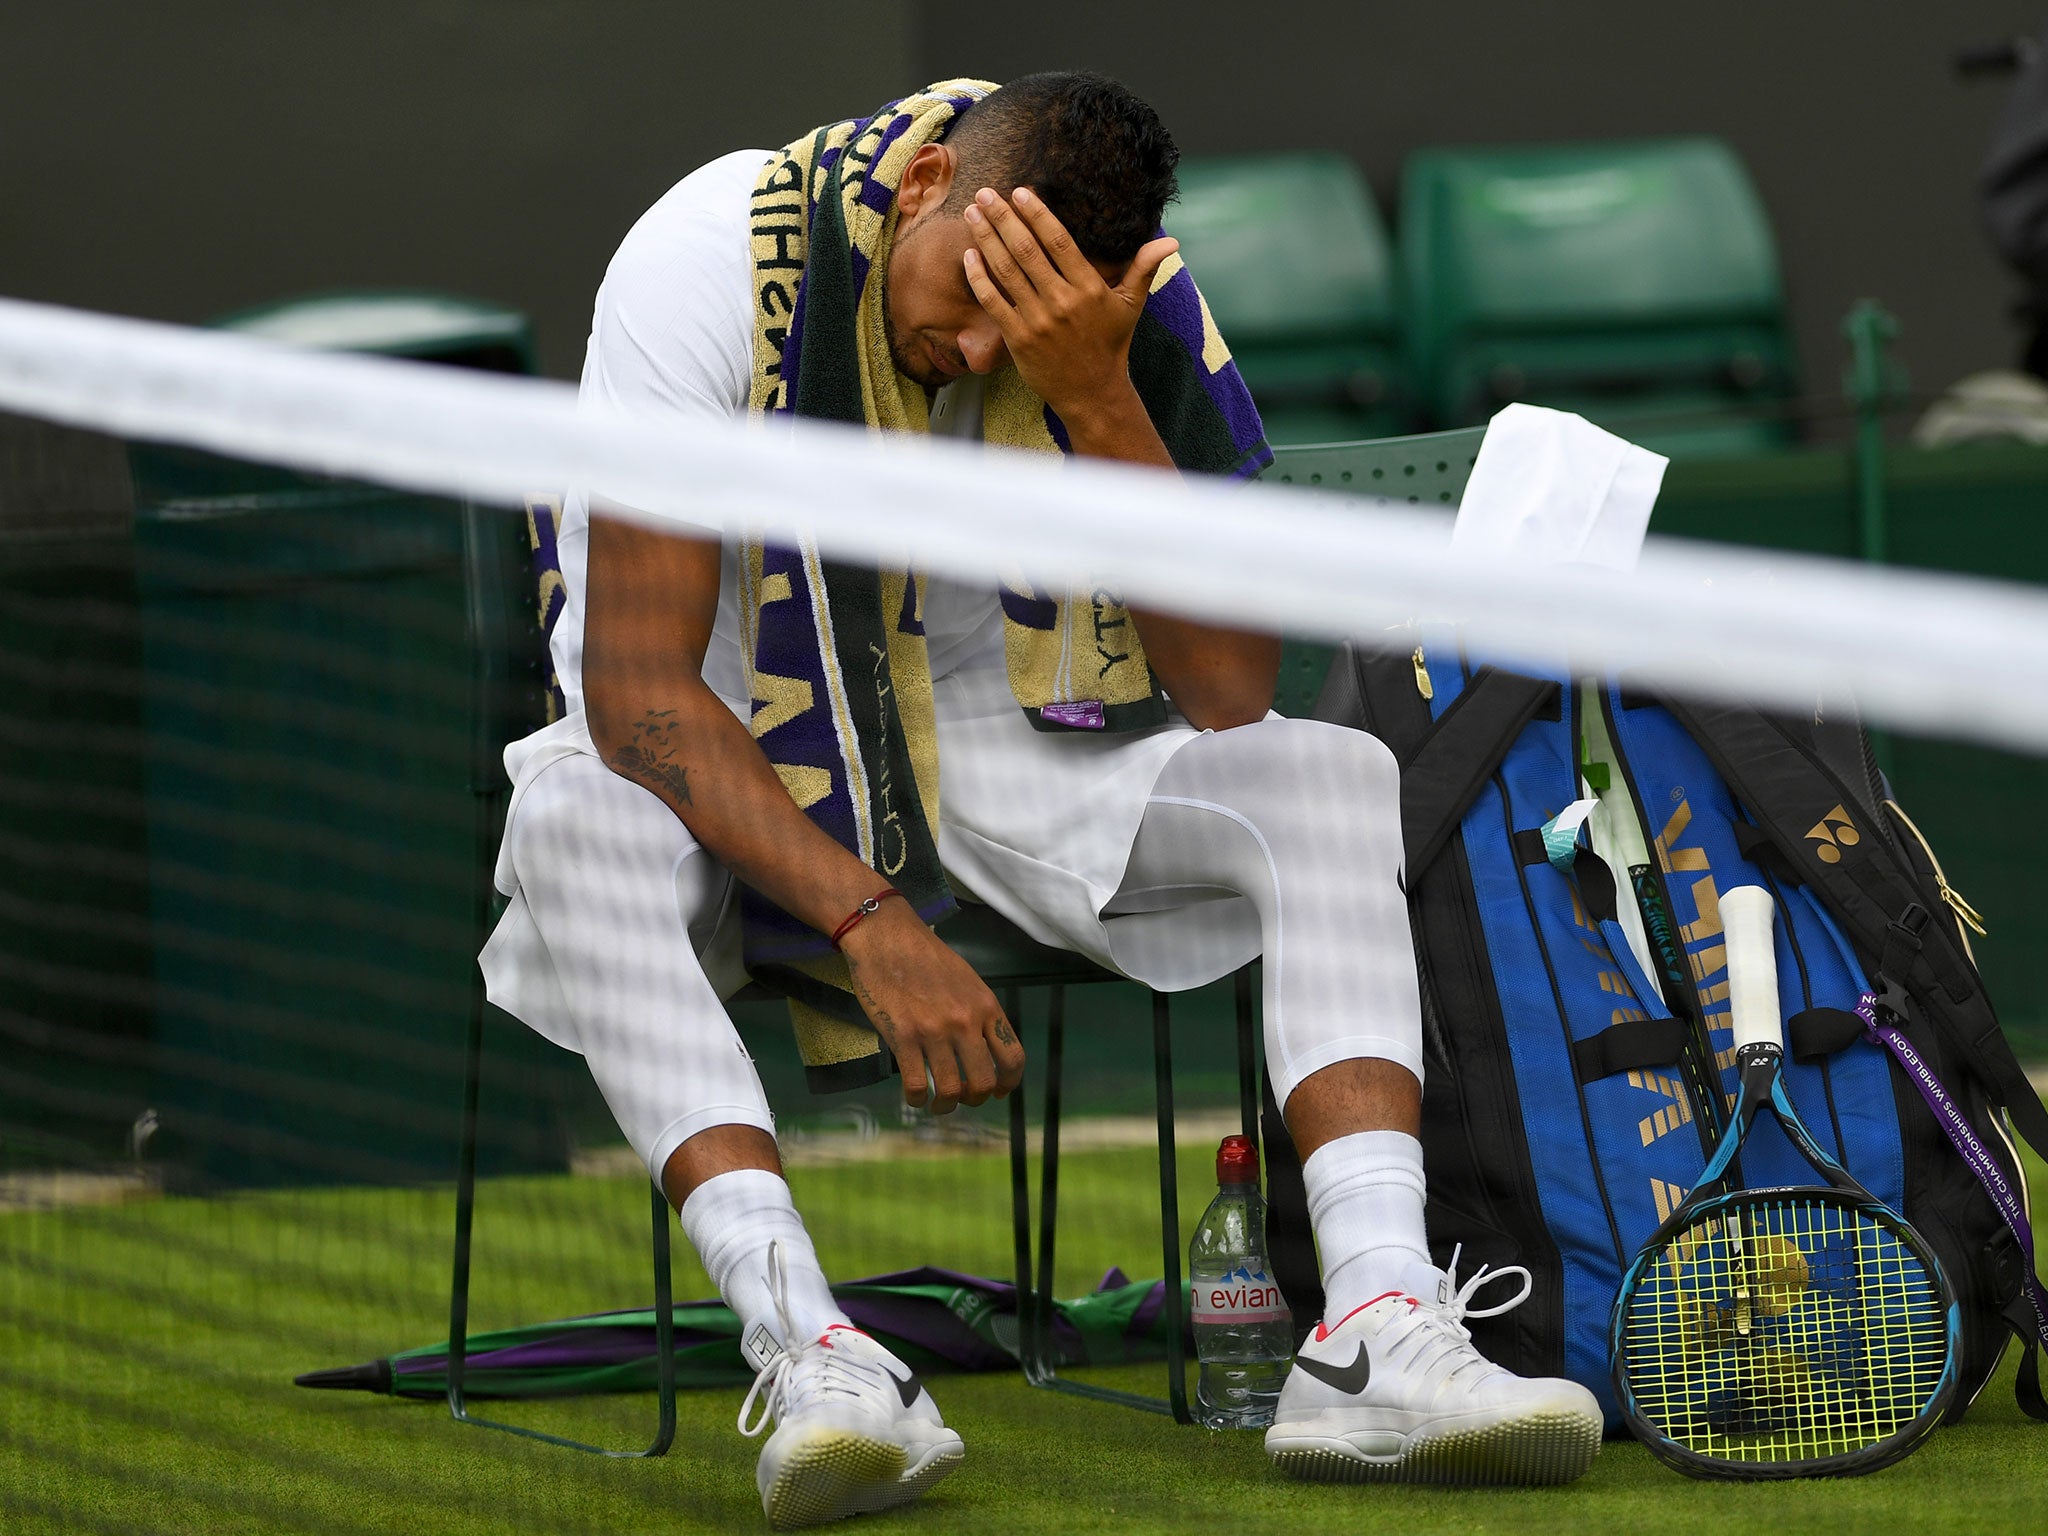 Nick Kyrgios' Wimbledon campaign is over